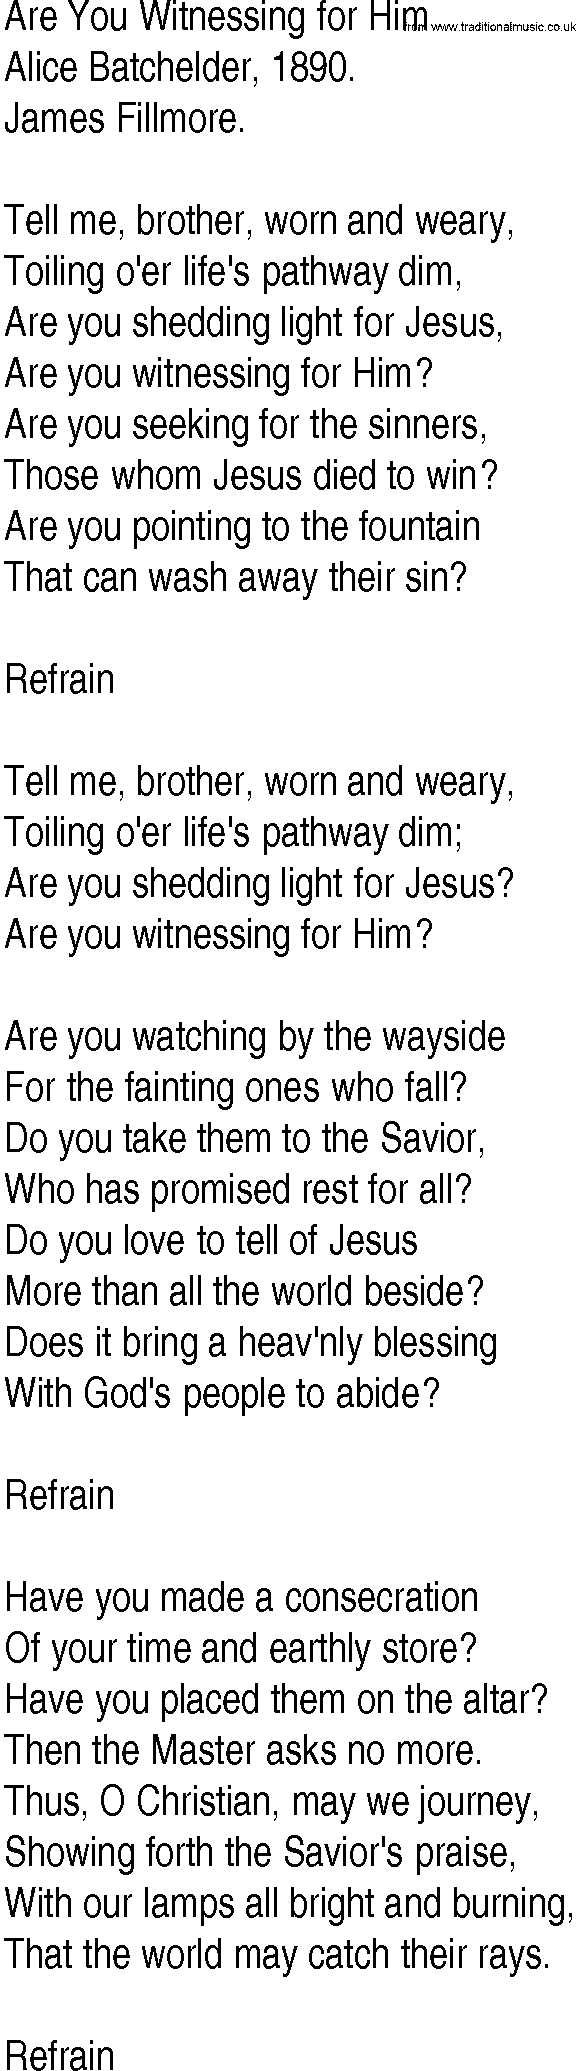 Hymn and Gospel Song: Are You Witnessing for Him by Alice Batchelder lyrics